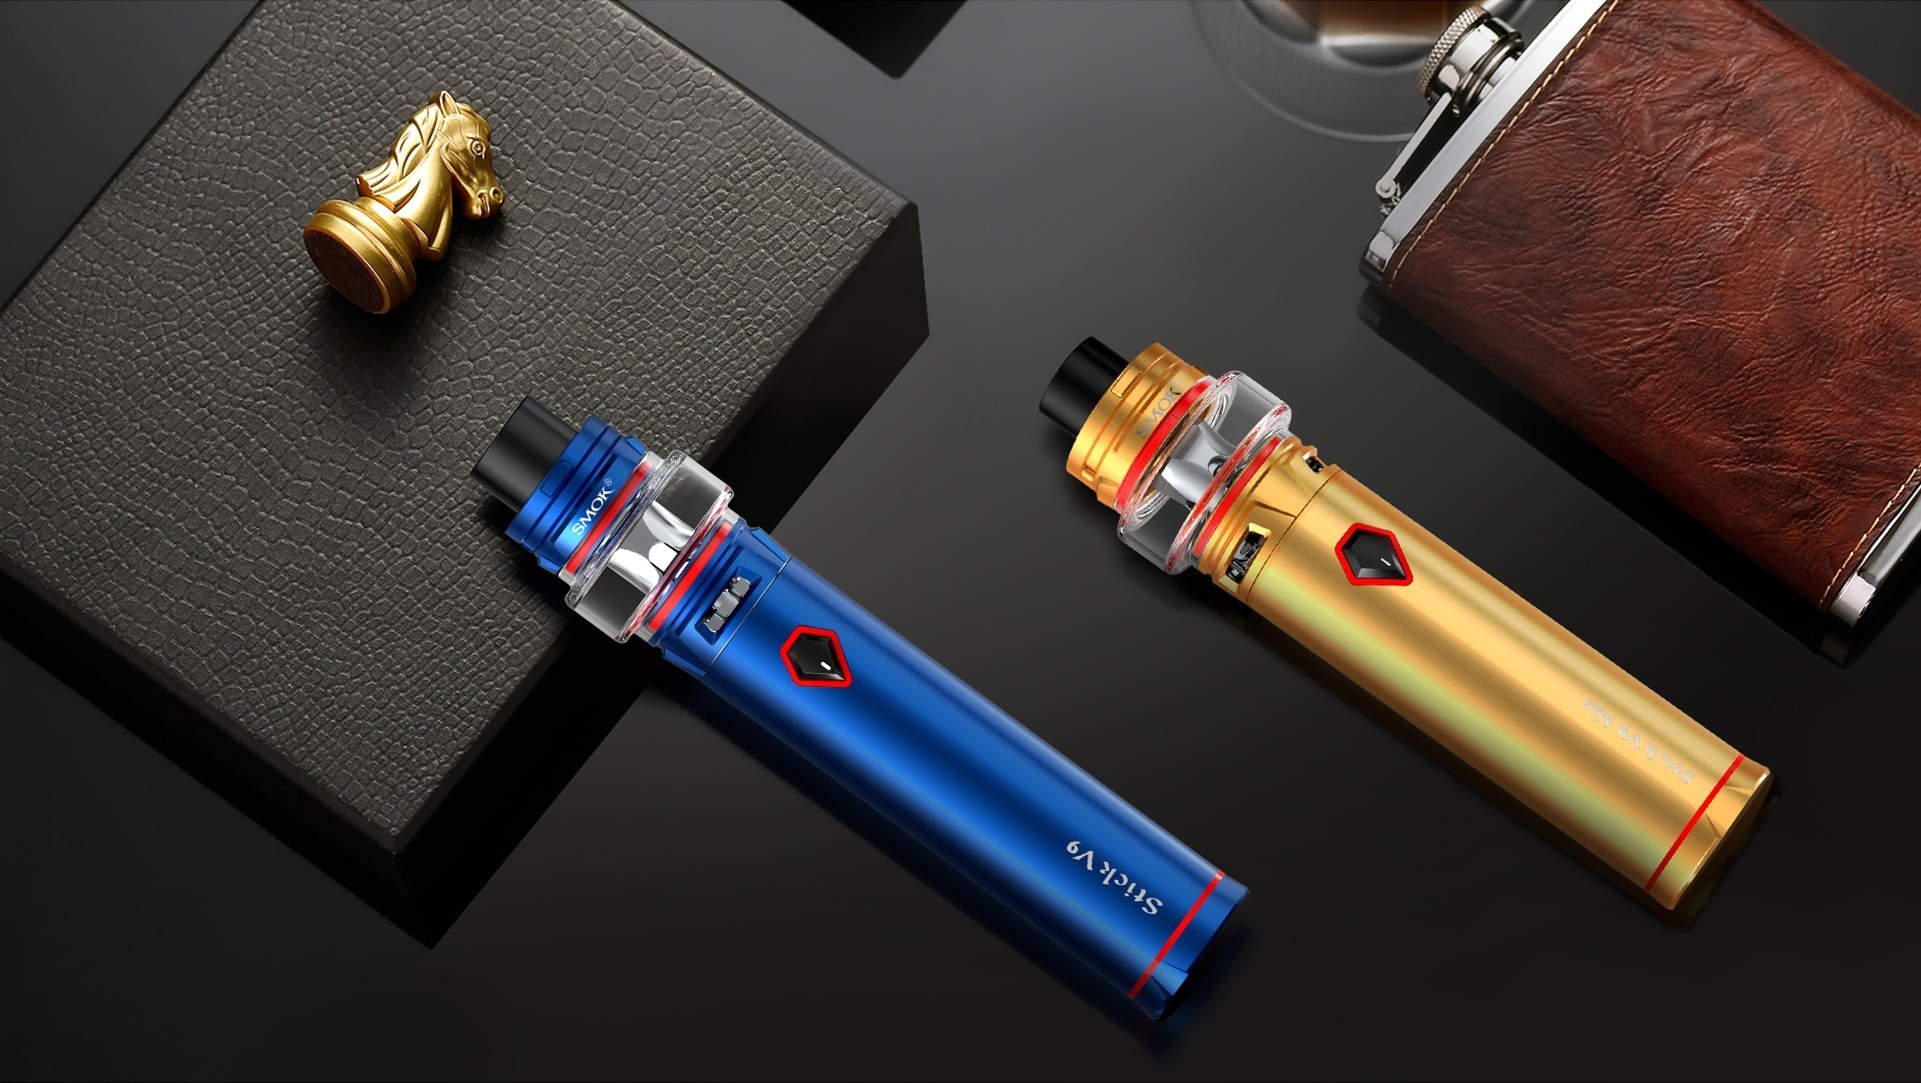 Buy SMOK Stick V9 3000 mAh Kit and enjoy vaping! Find the latest electronic cigarettes from SMOK, VooPoo, Aspire and Joyetech at vape shop!